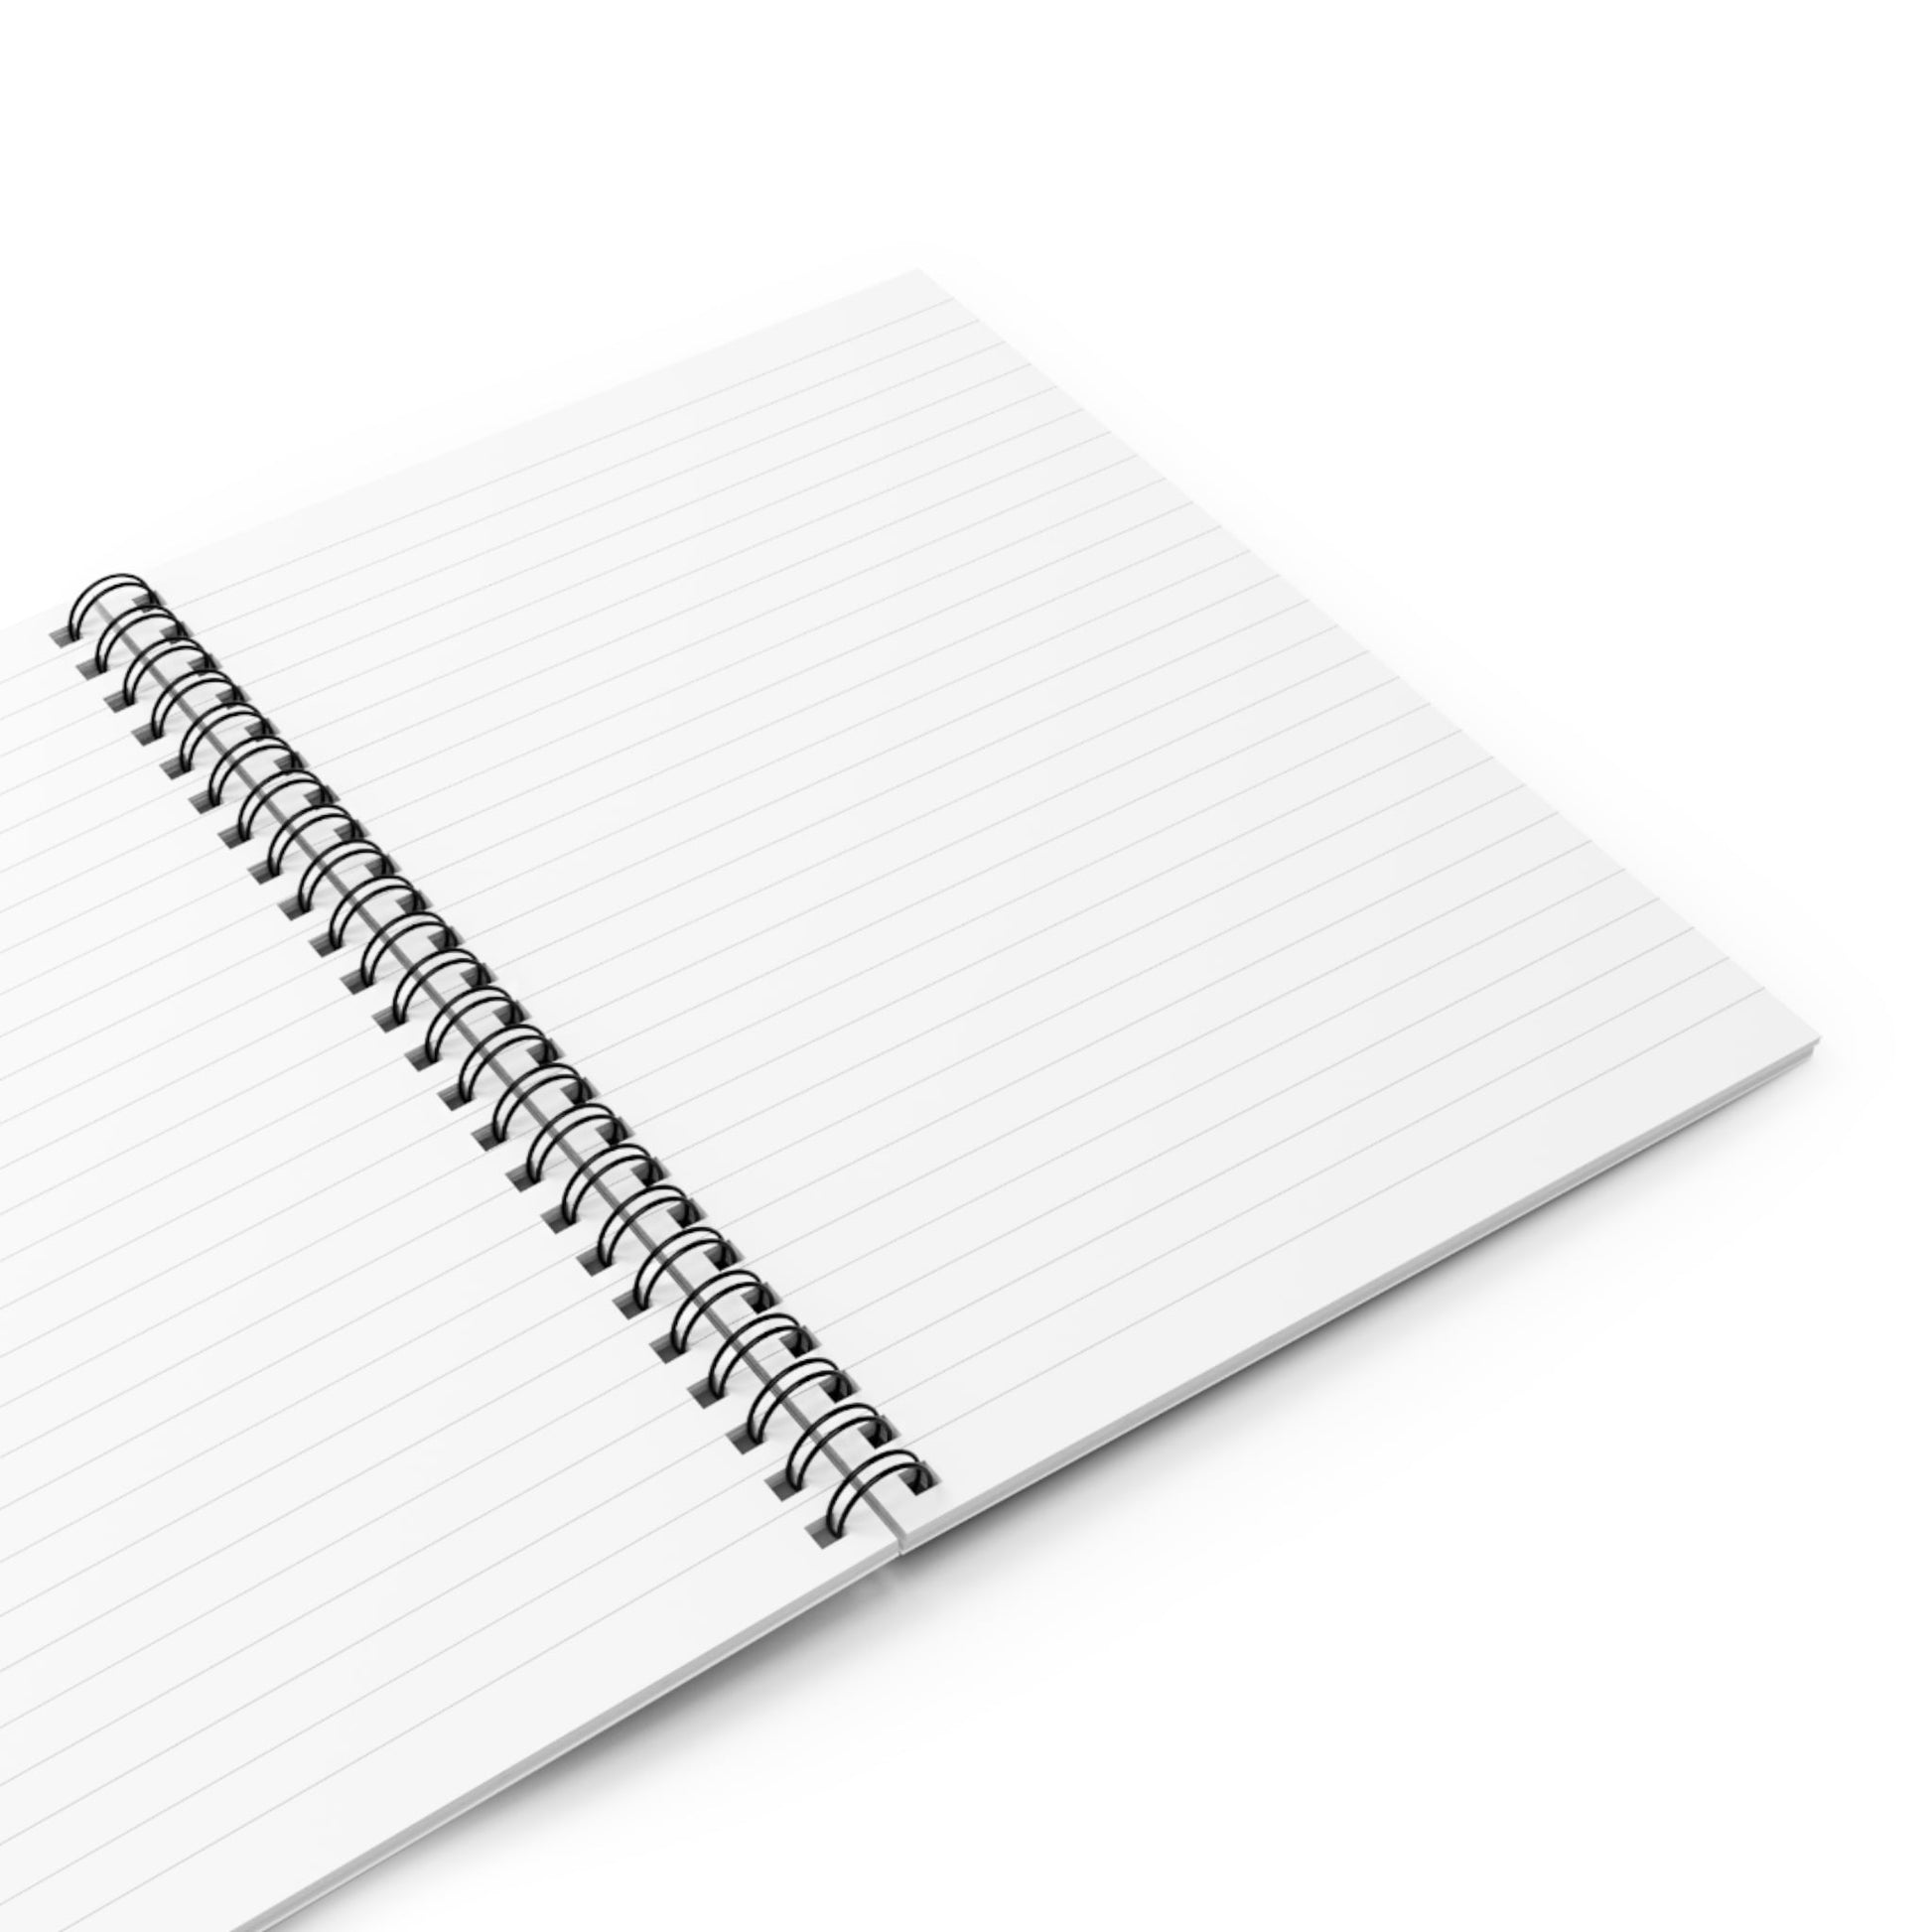 Spiral Notebook with Famous Skull Cover Opened with Blank White College Ruled Pages